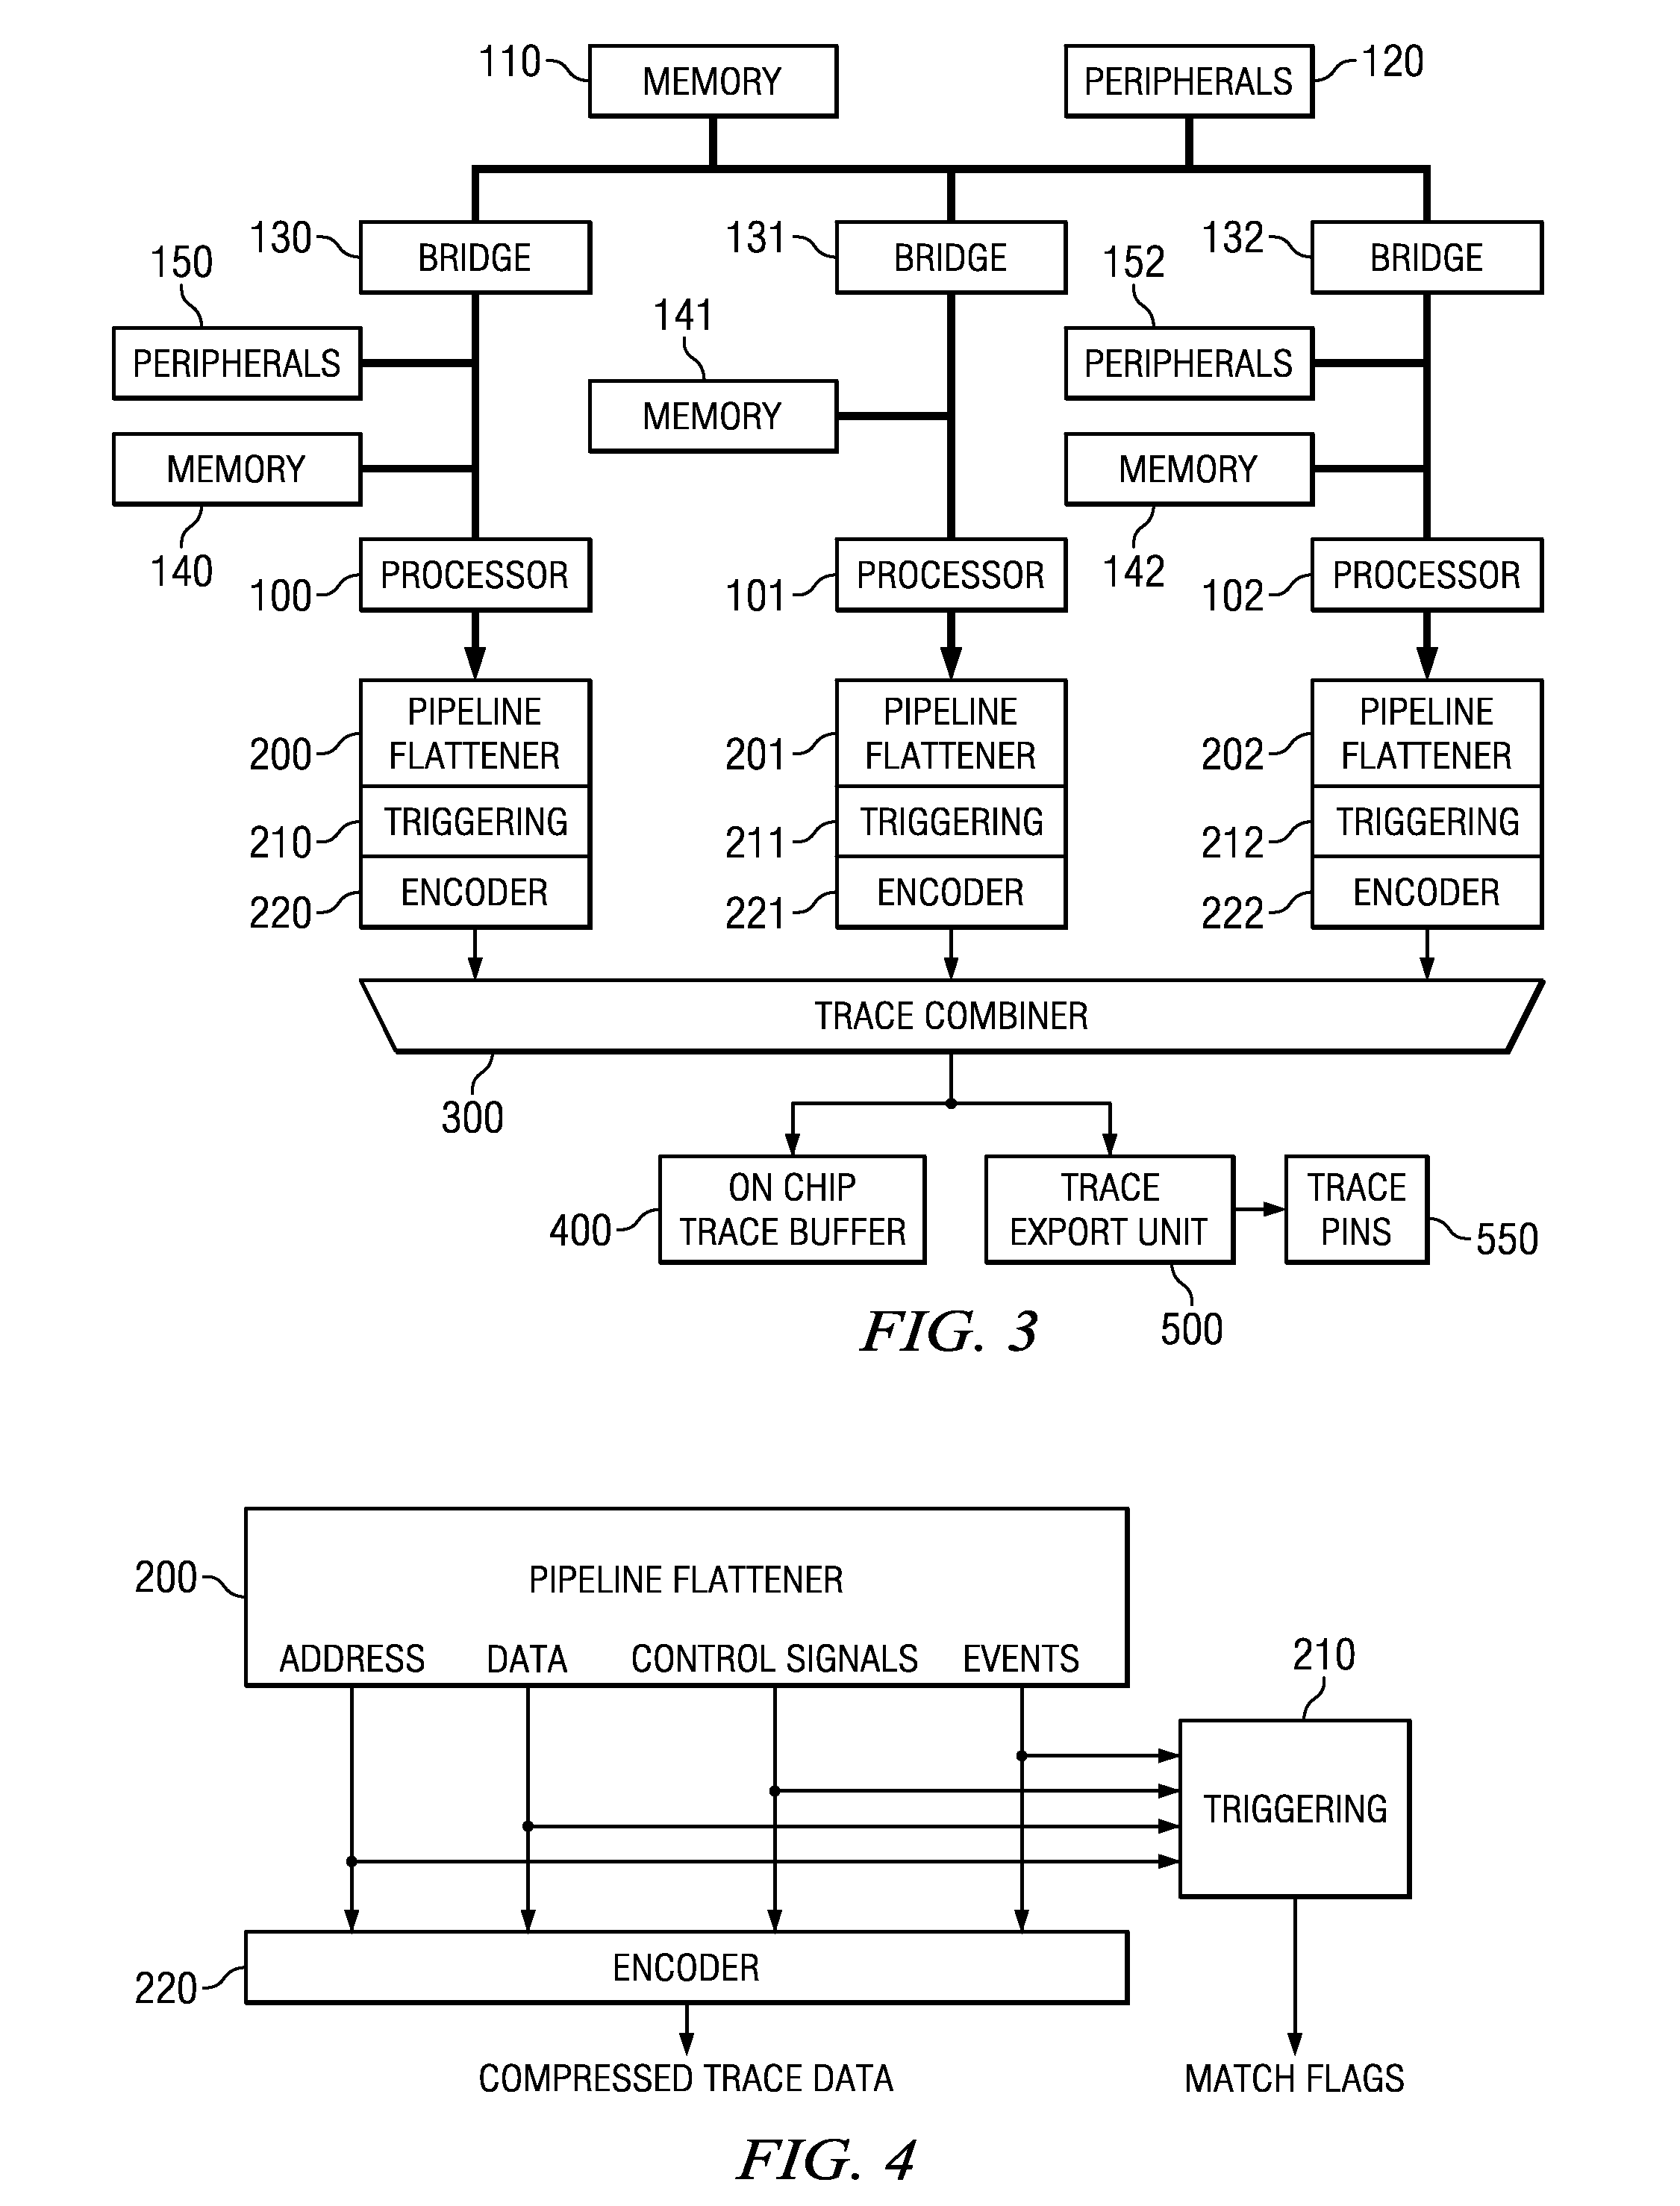 Circuits, systems, apparatus and processes for monitoring activity in multi-processing systems